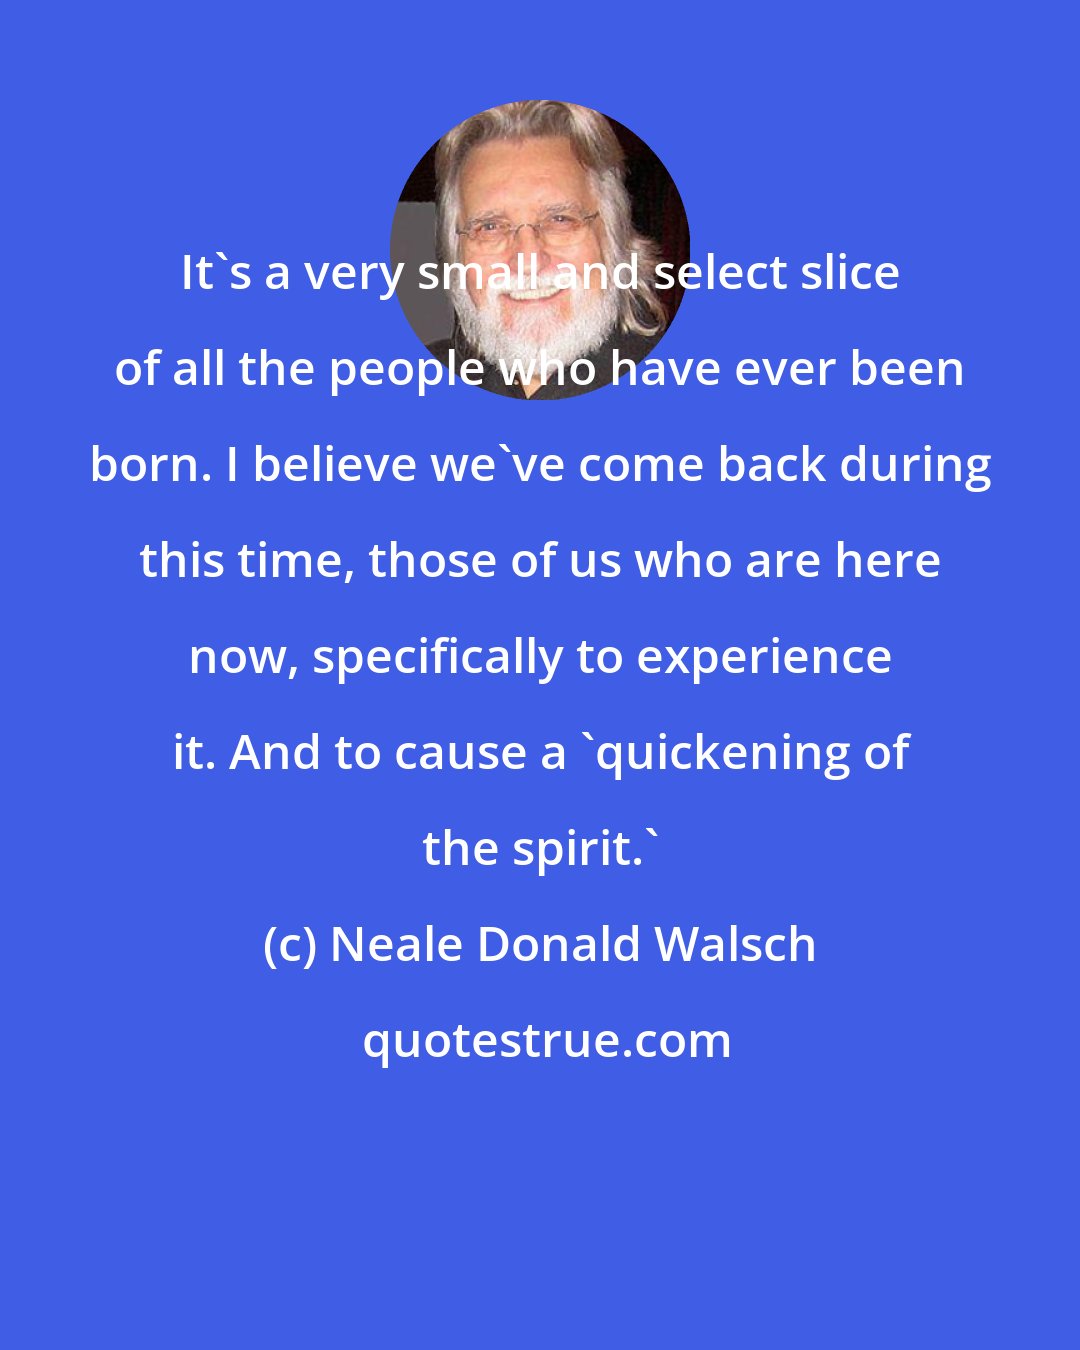 Neale Donald Walsch: It's a very small and select slice of all the people who have ever been born. I believe we've come back during this time, those of us who are here now, specifically to experience it. And to cause a 'quickening of the spirit.'